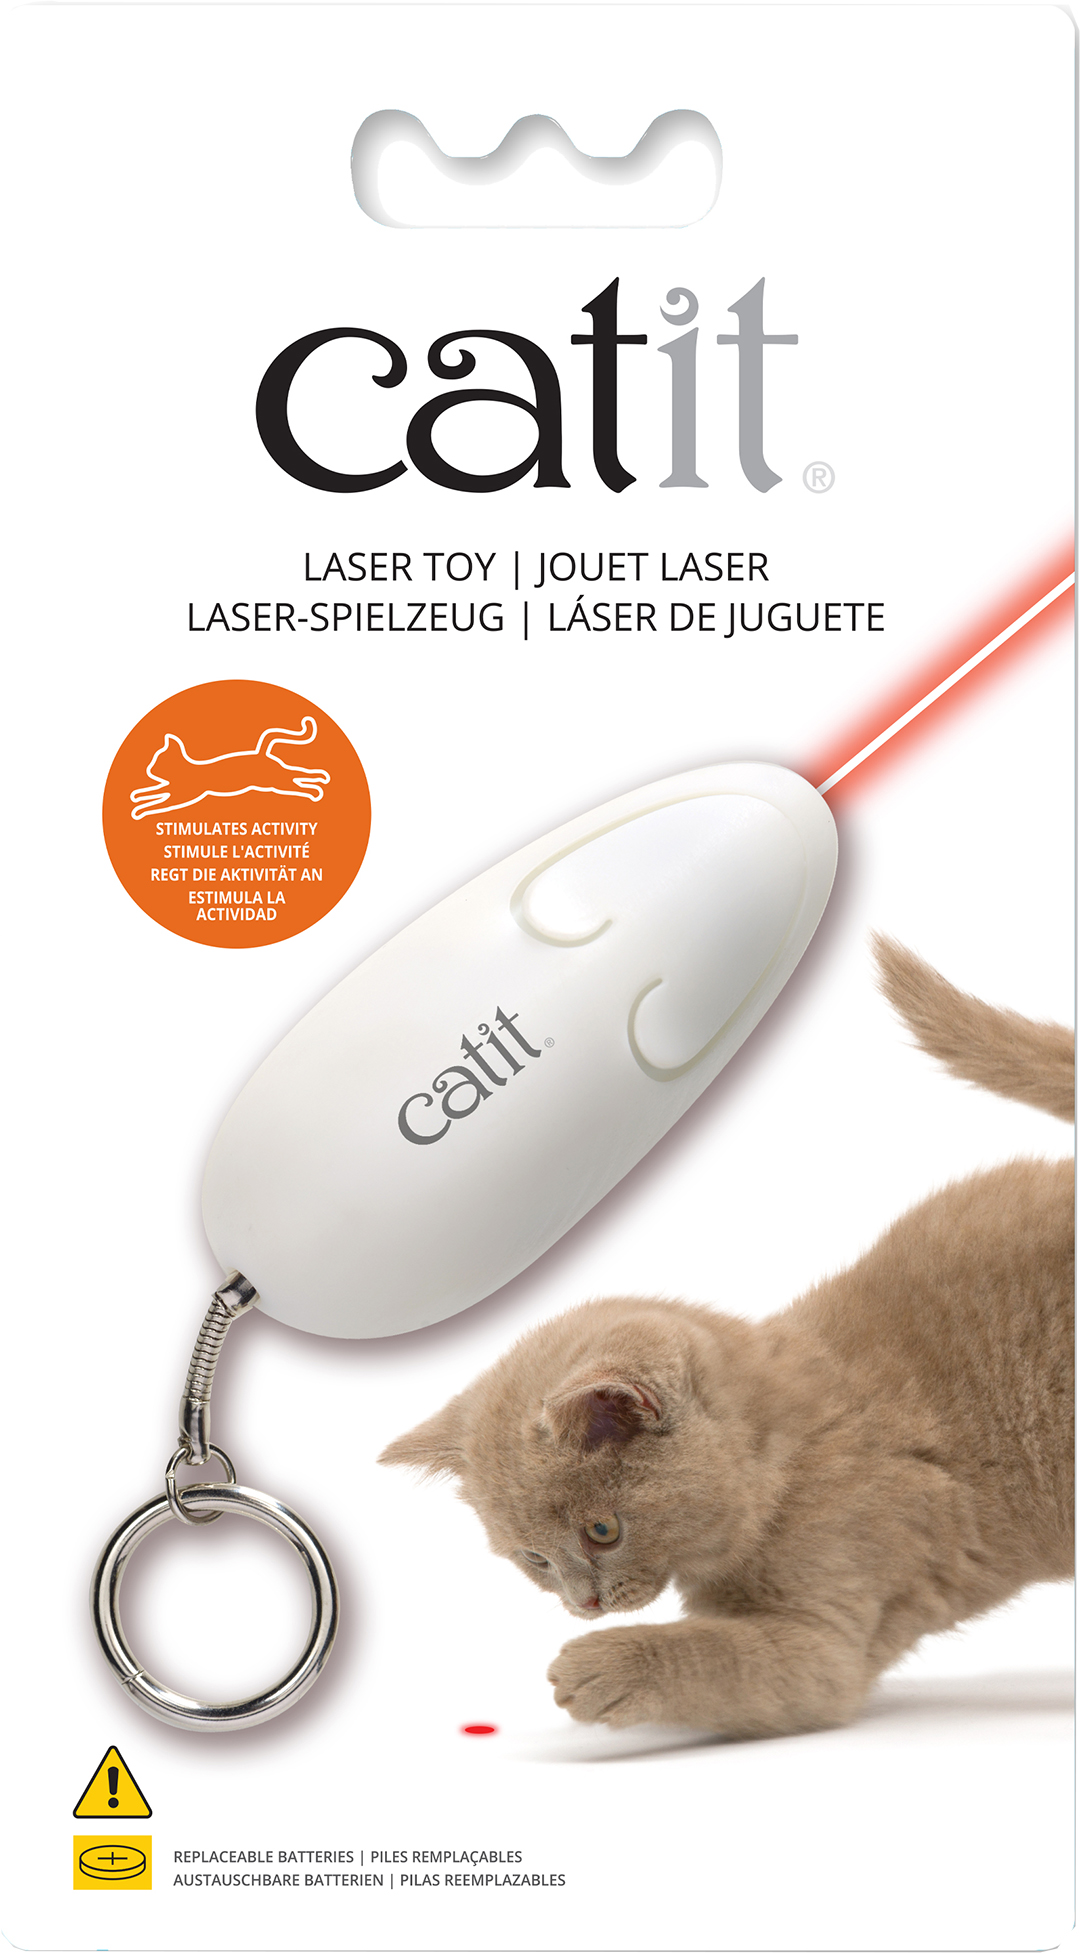 Ca 2.0 laser mouse toy wit - Product shot